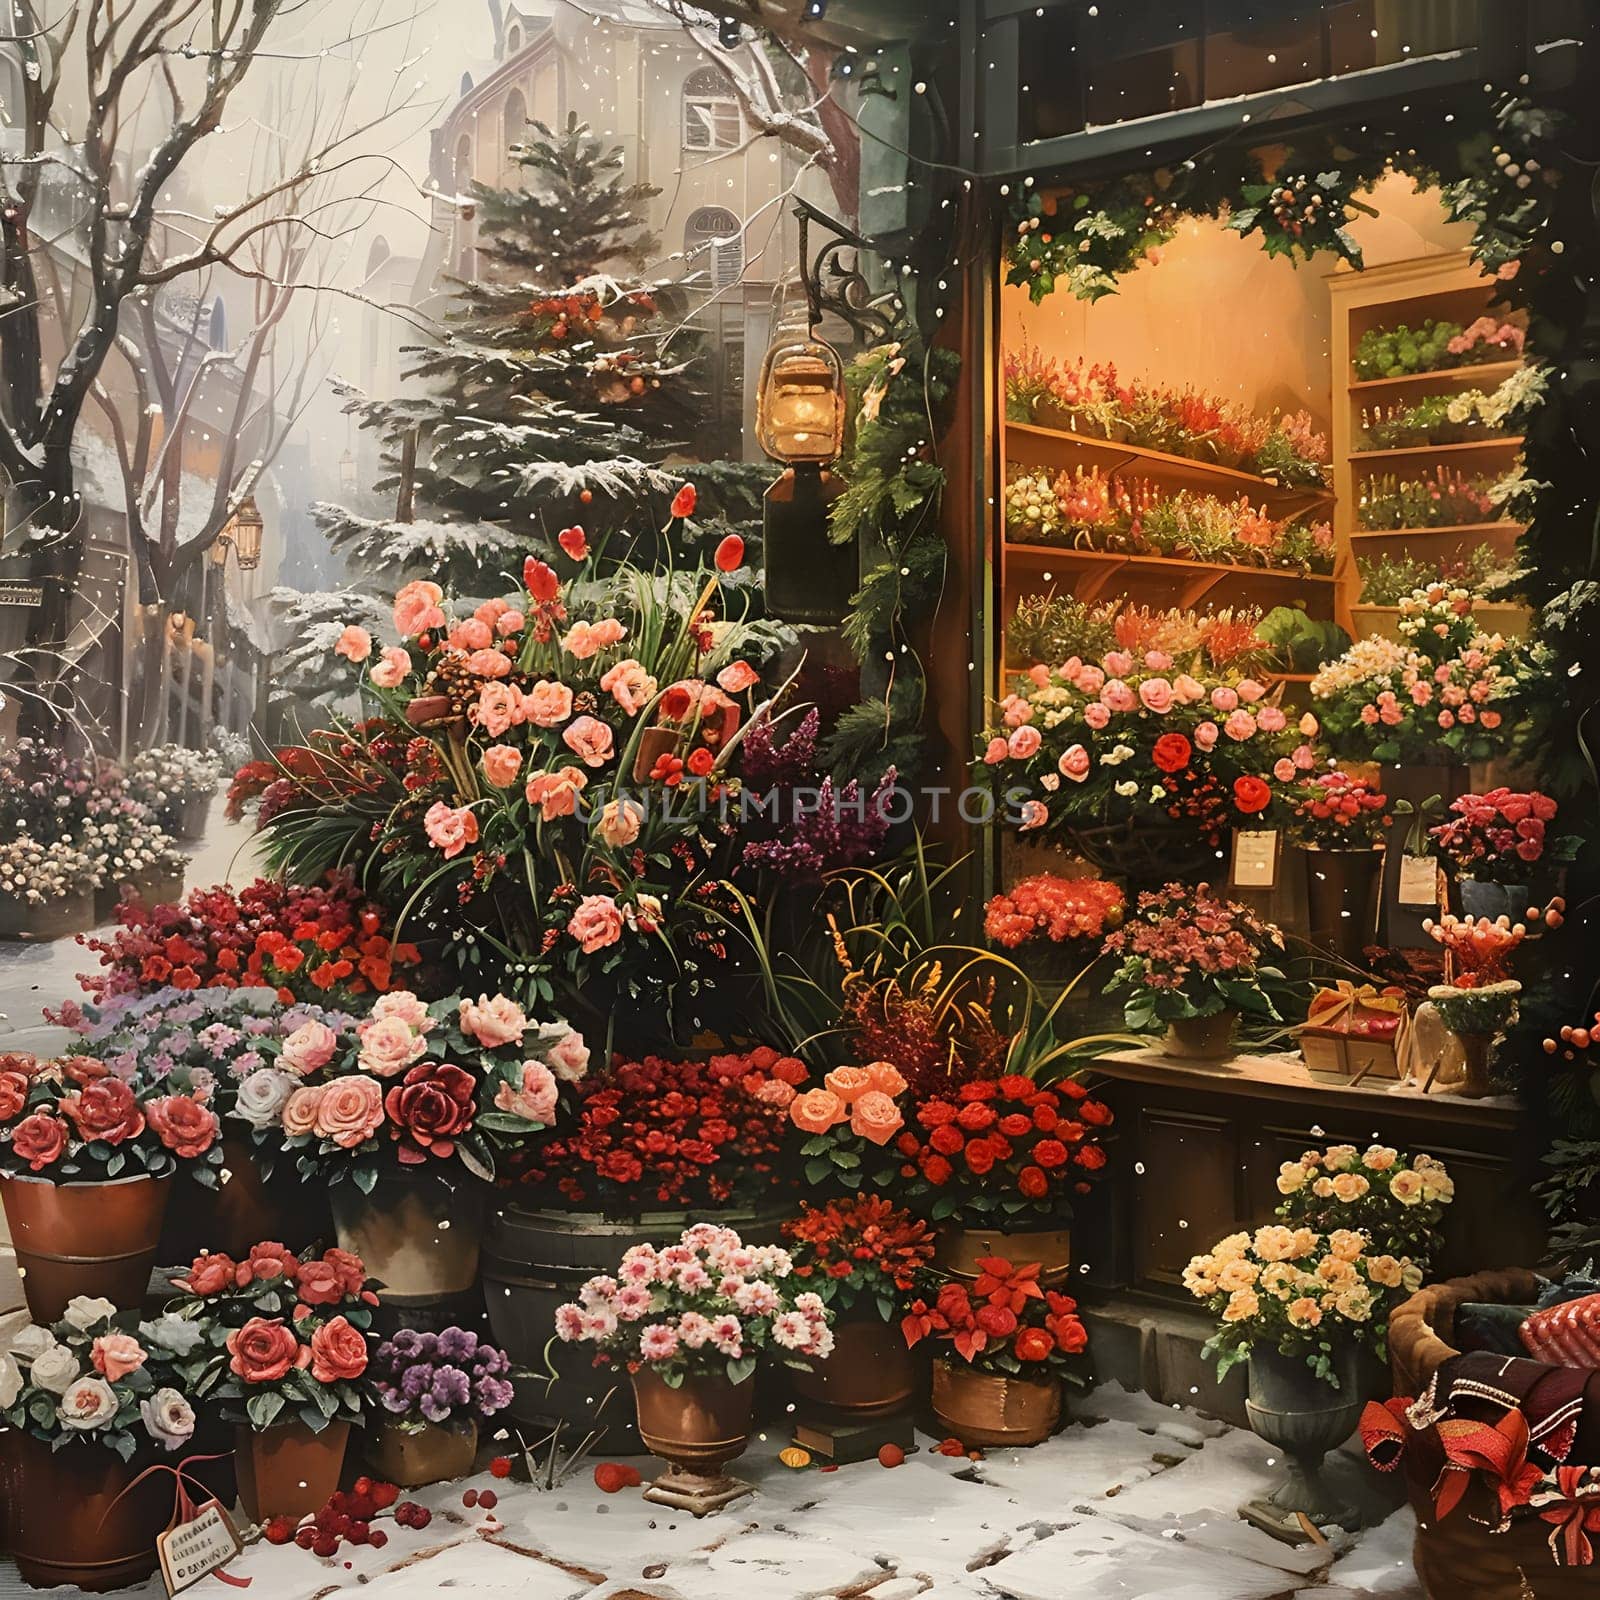 Creative arts a painting of flowers outside a flower shop by Nadtochiy